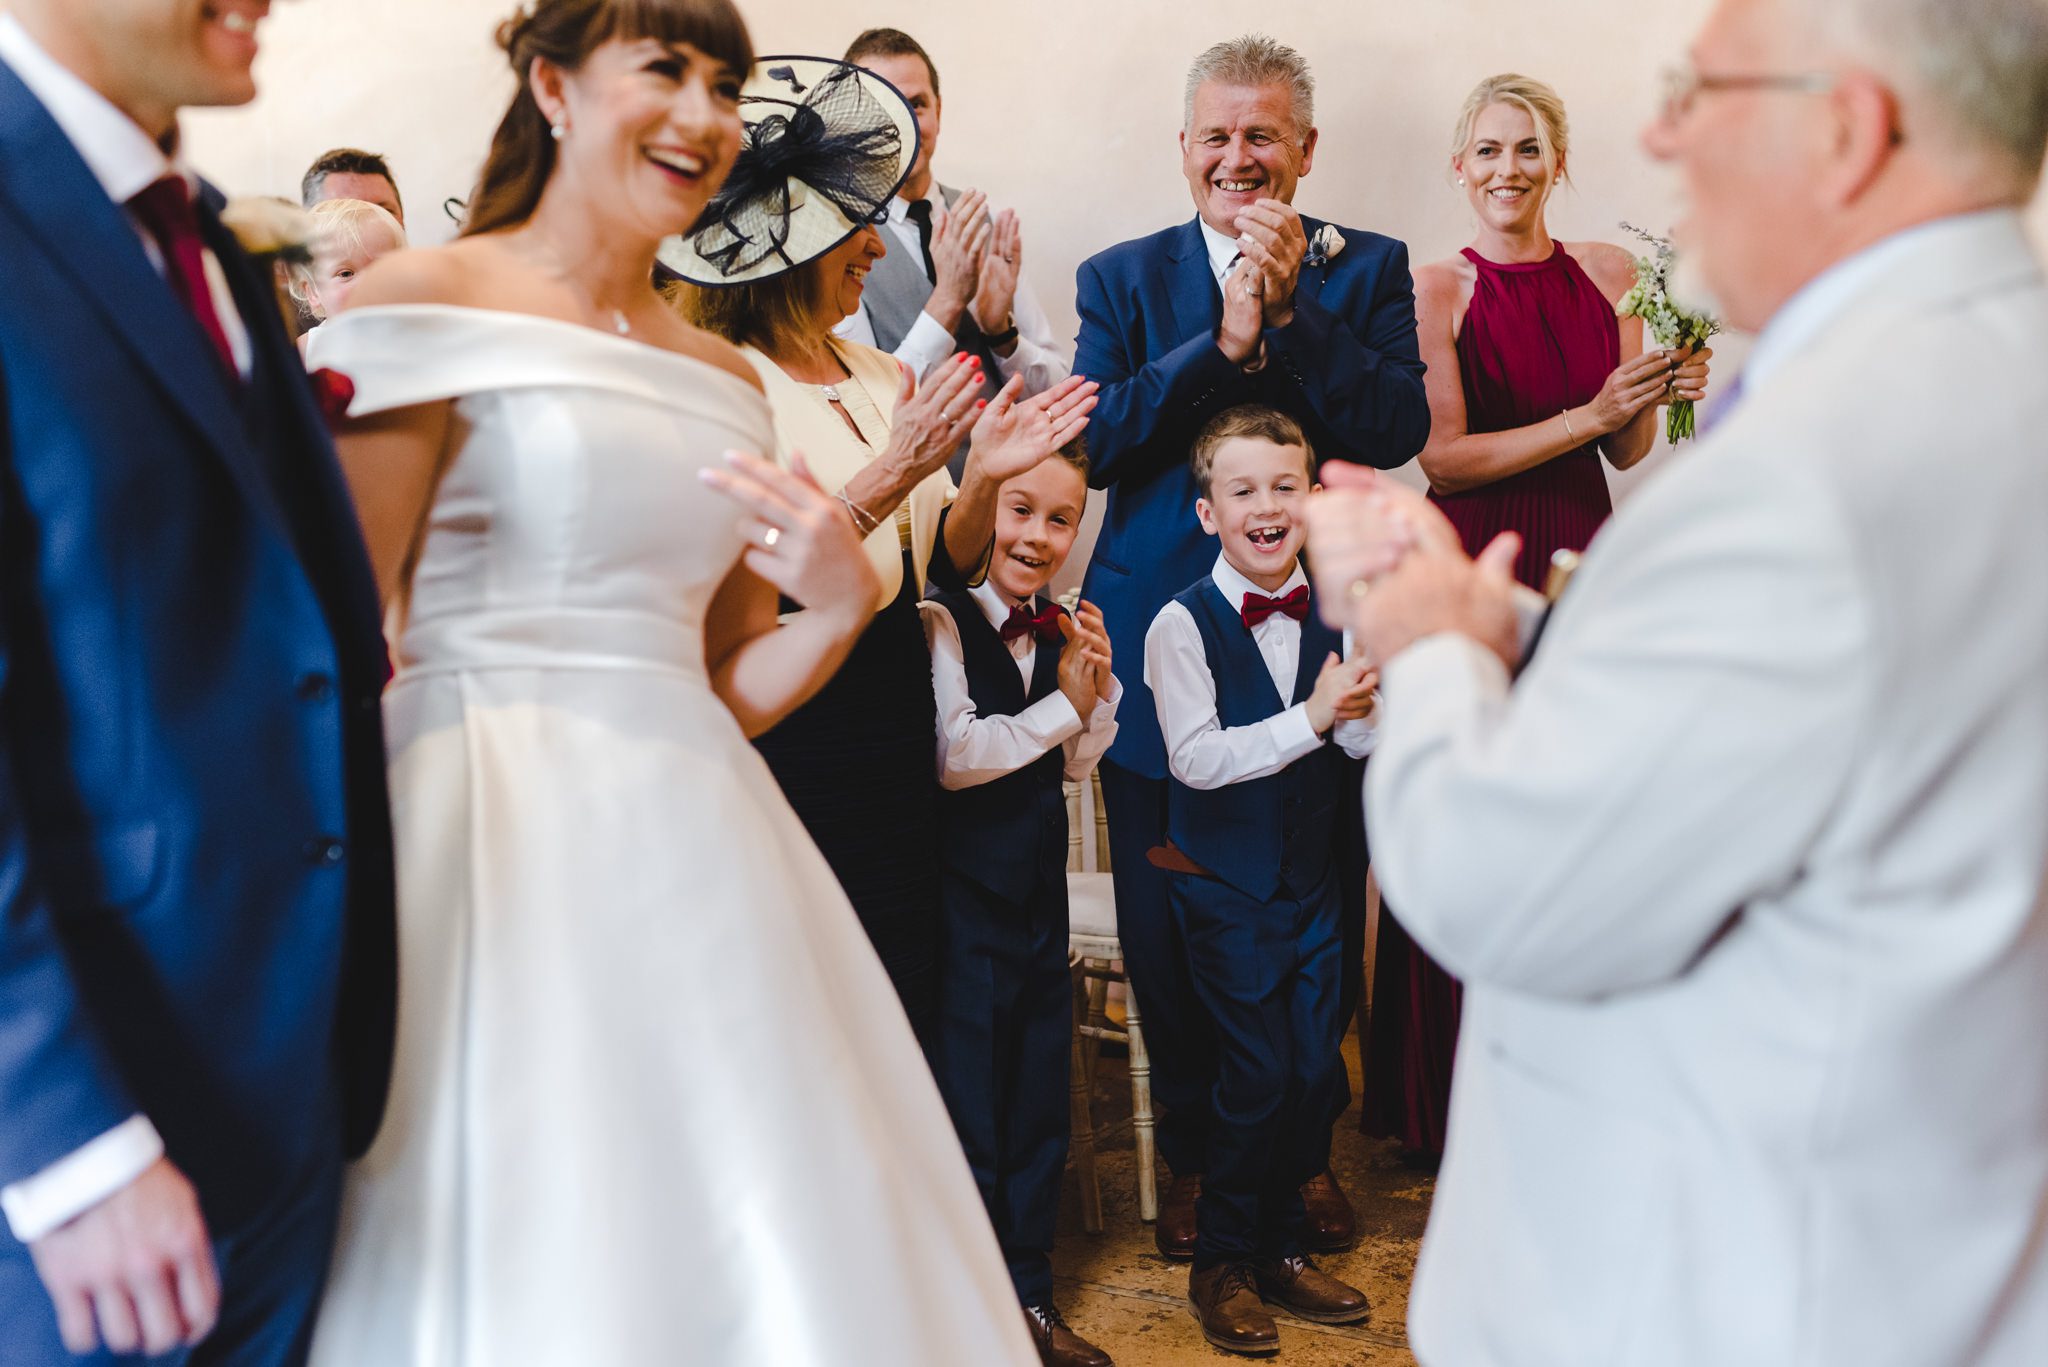 Kids clapping a marriage